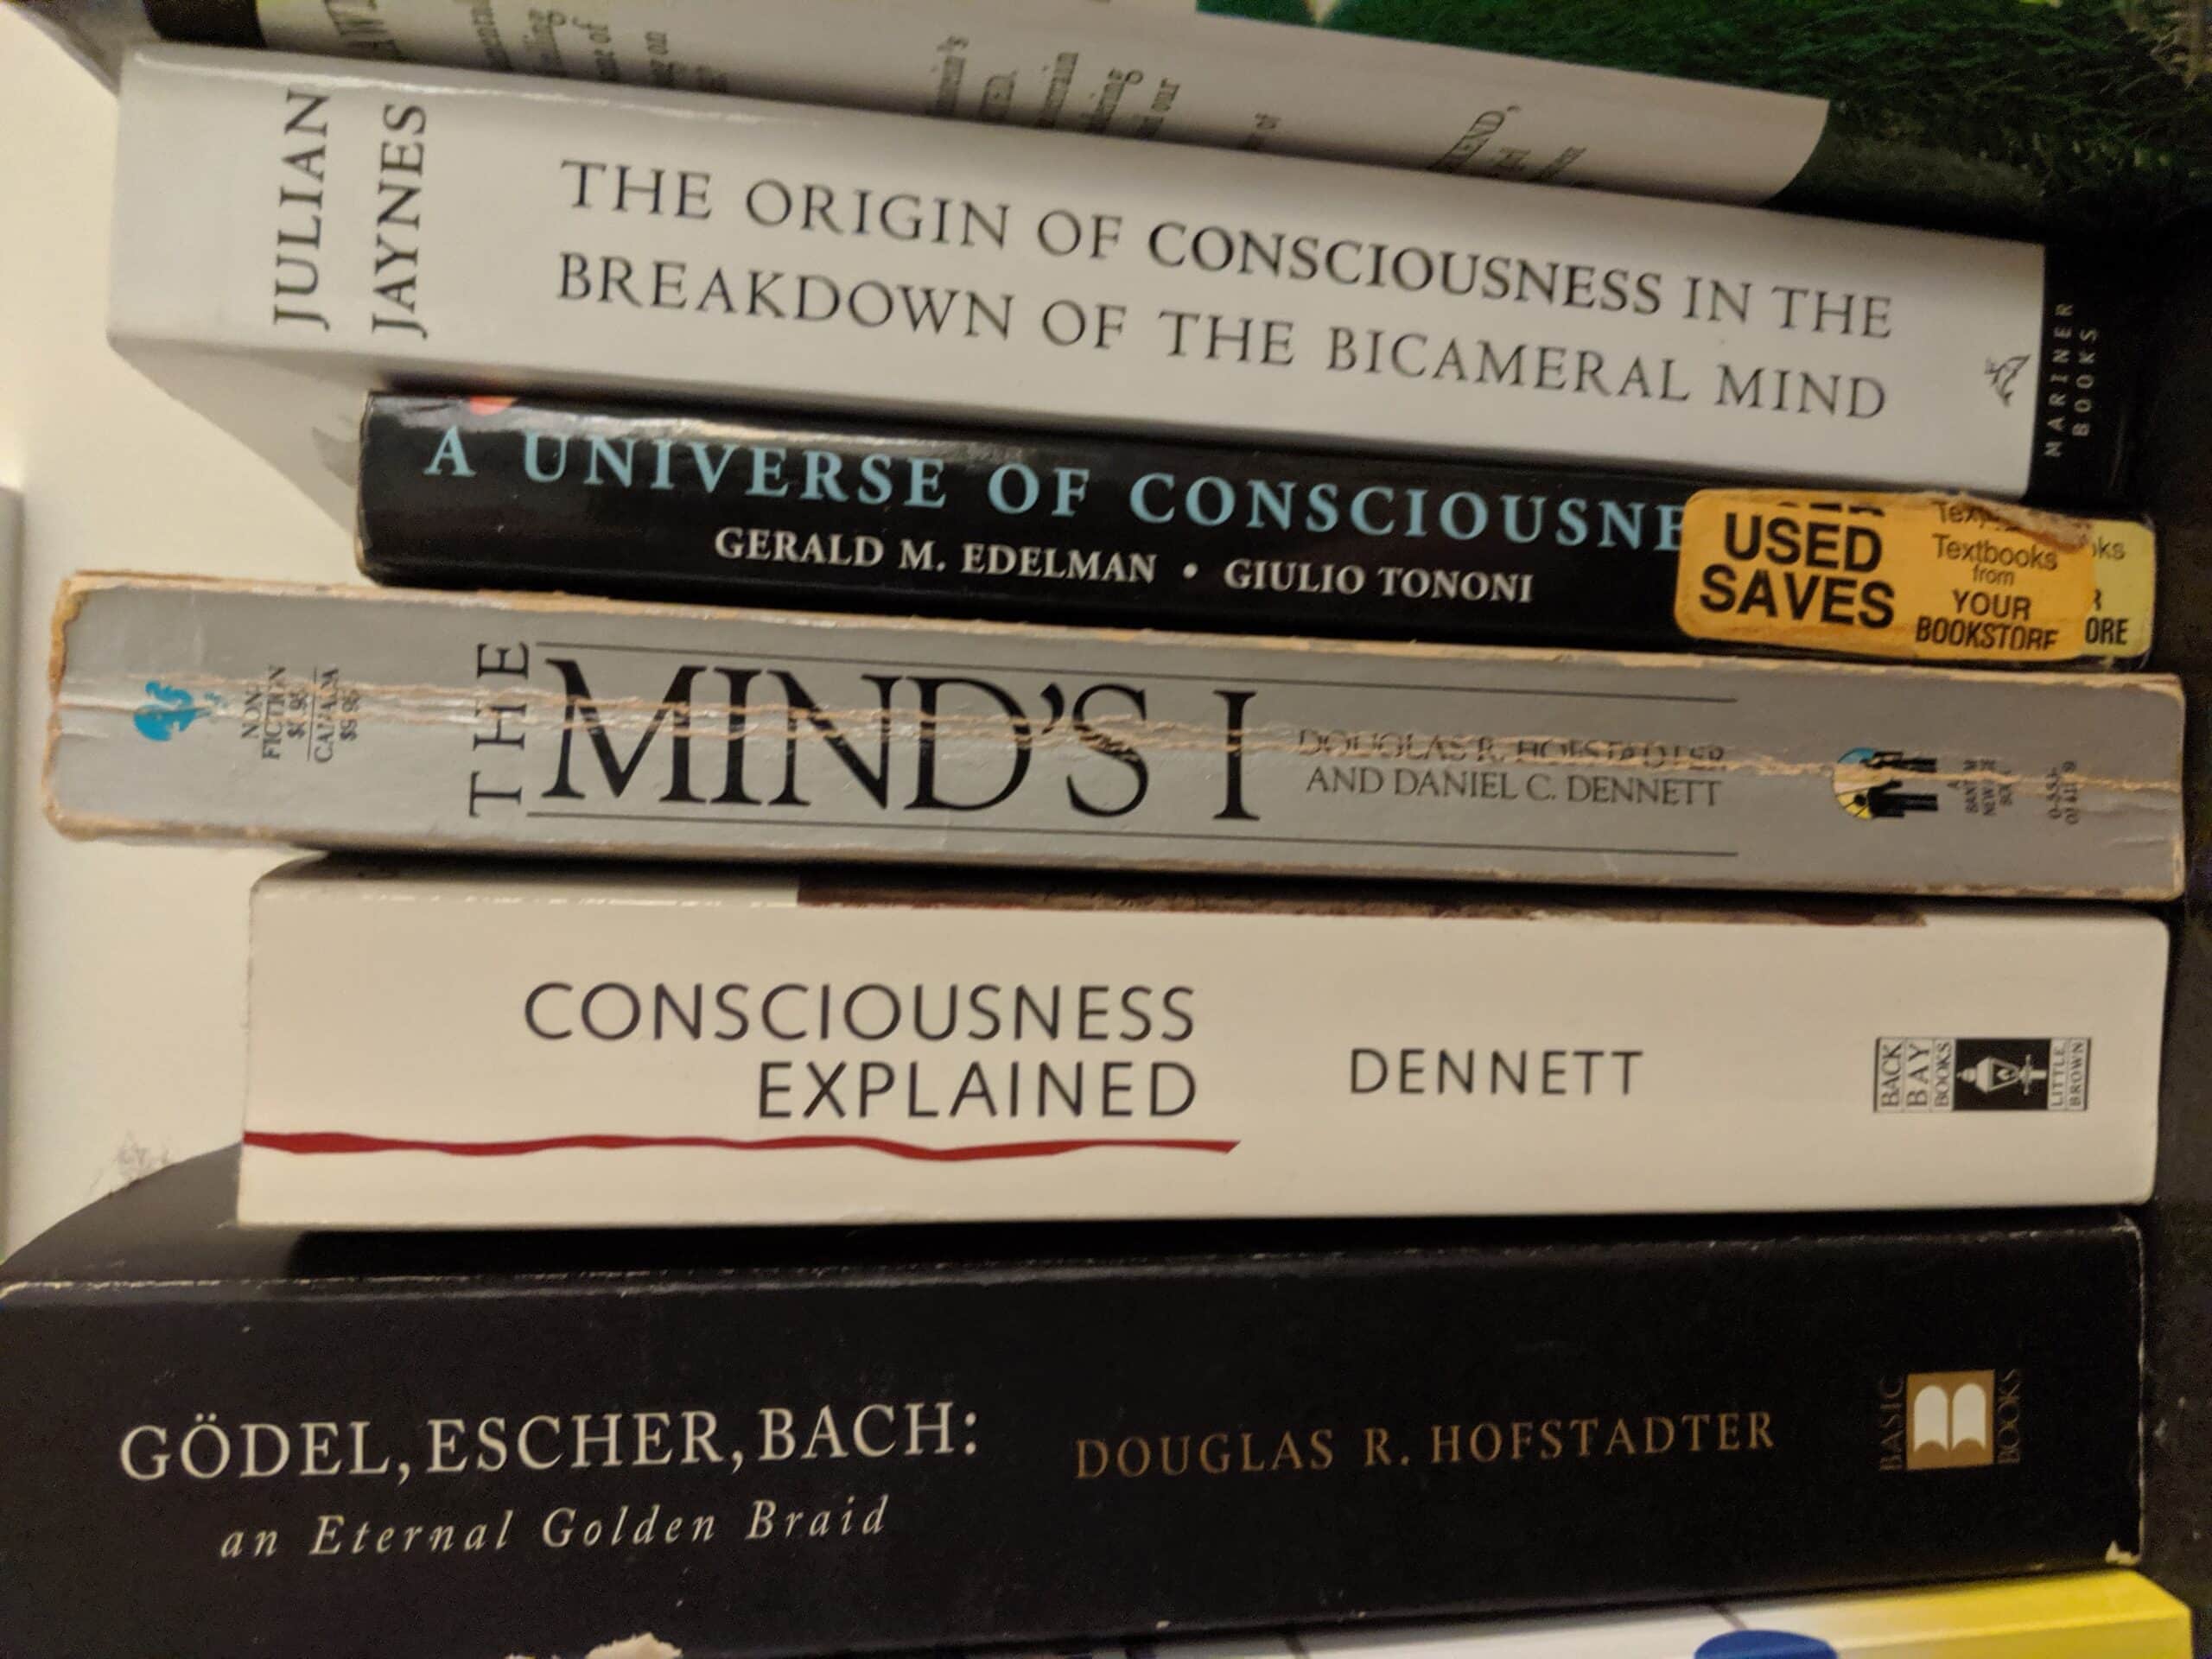 Here are books on consciousness found in our observable universe. These same books will also appear in a purely computational version of our universe -- written by computational authors -- who apparently are just as baffled by their conscious experiences as we are.